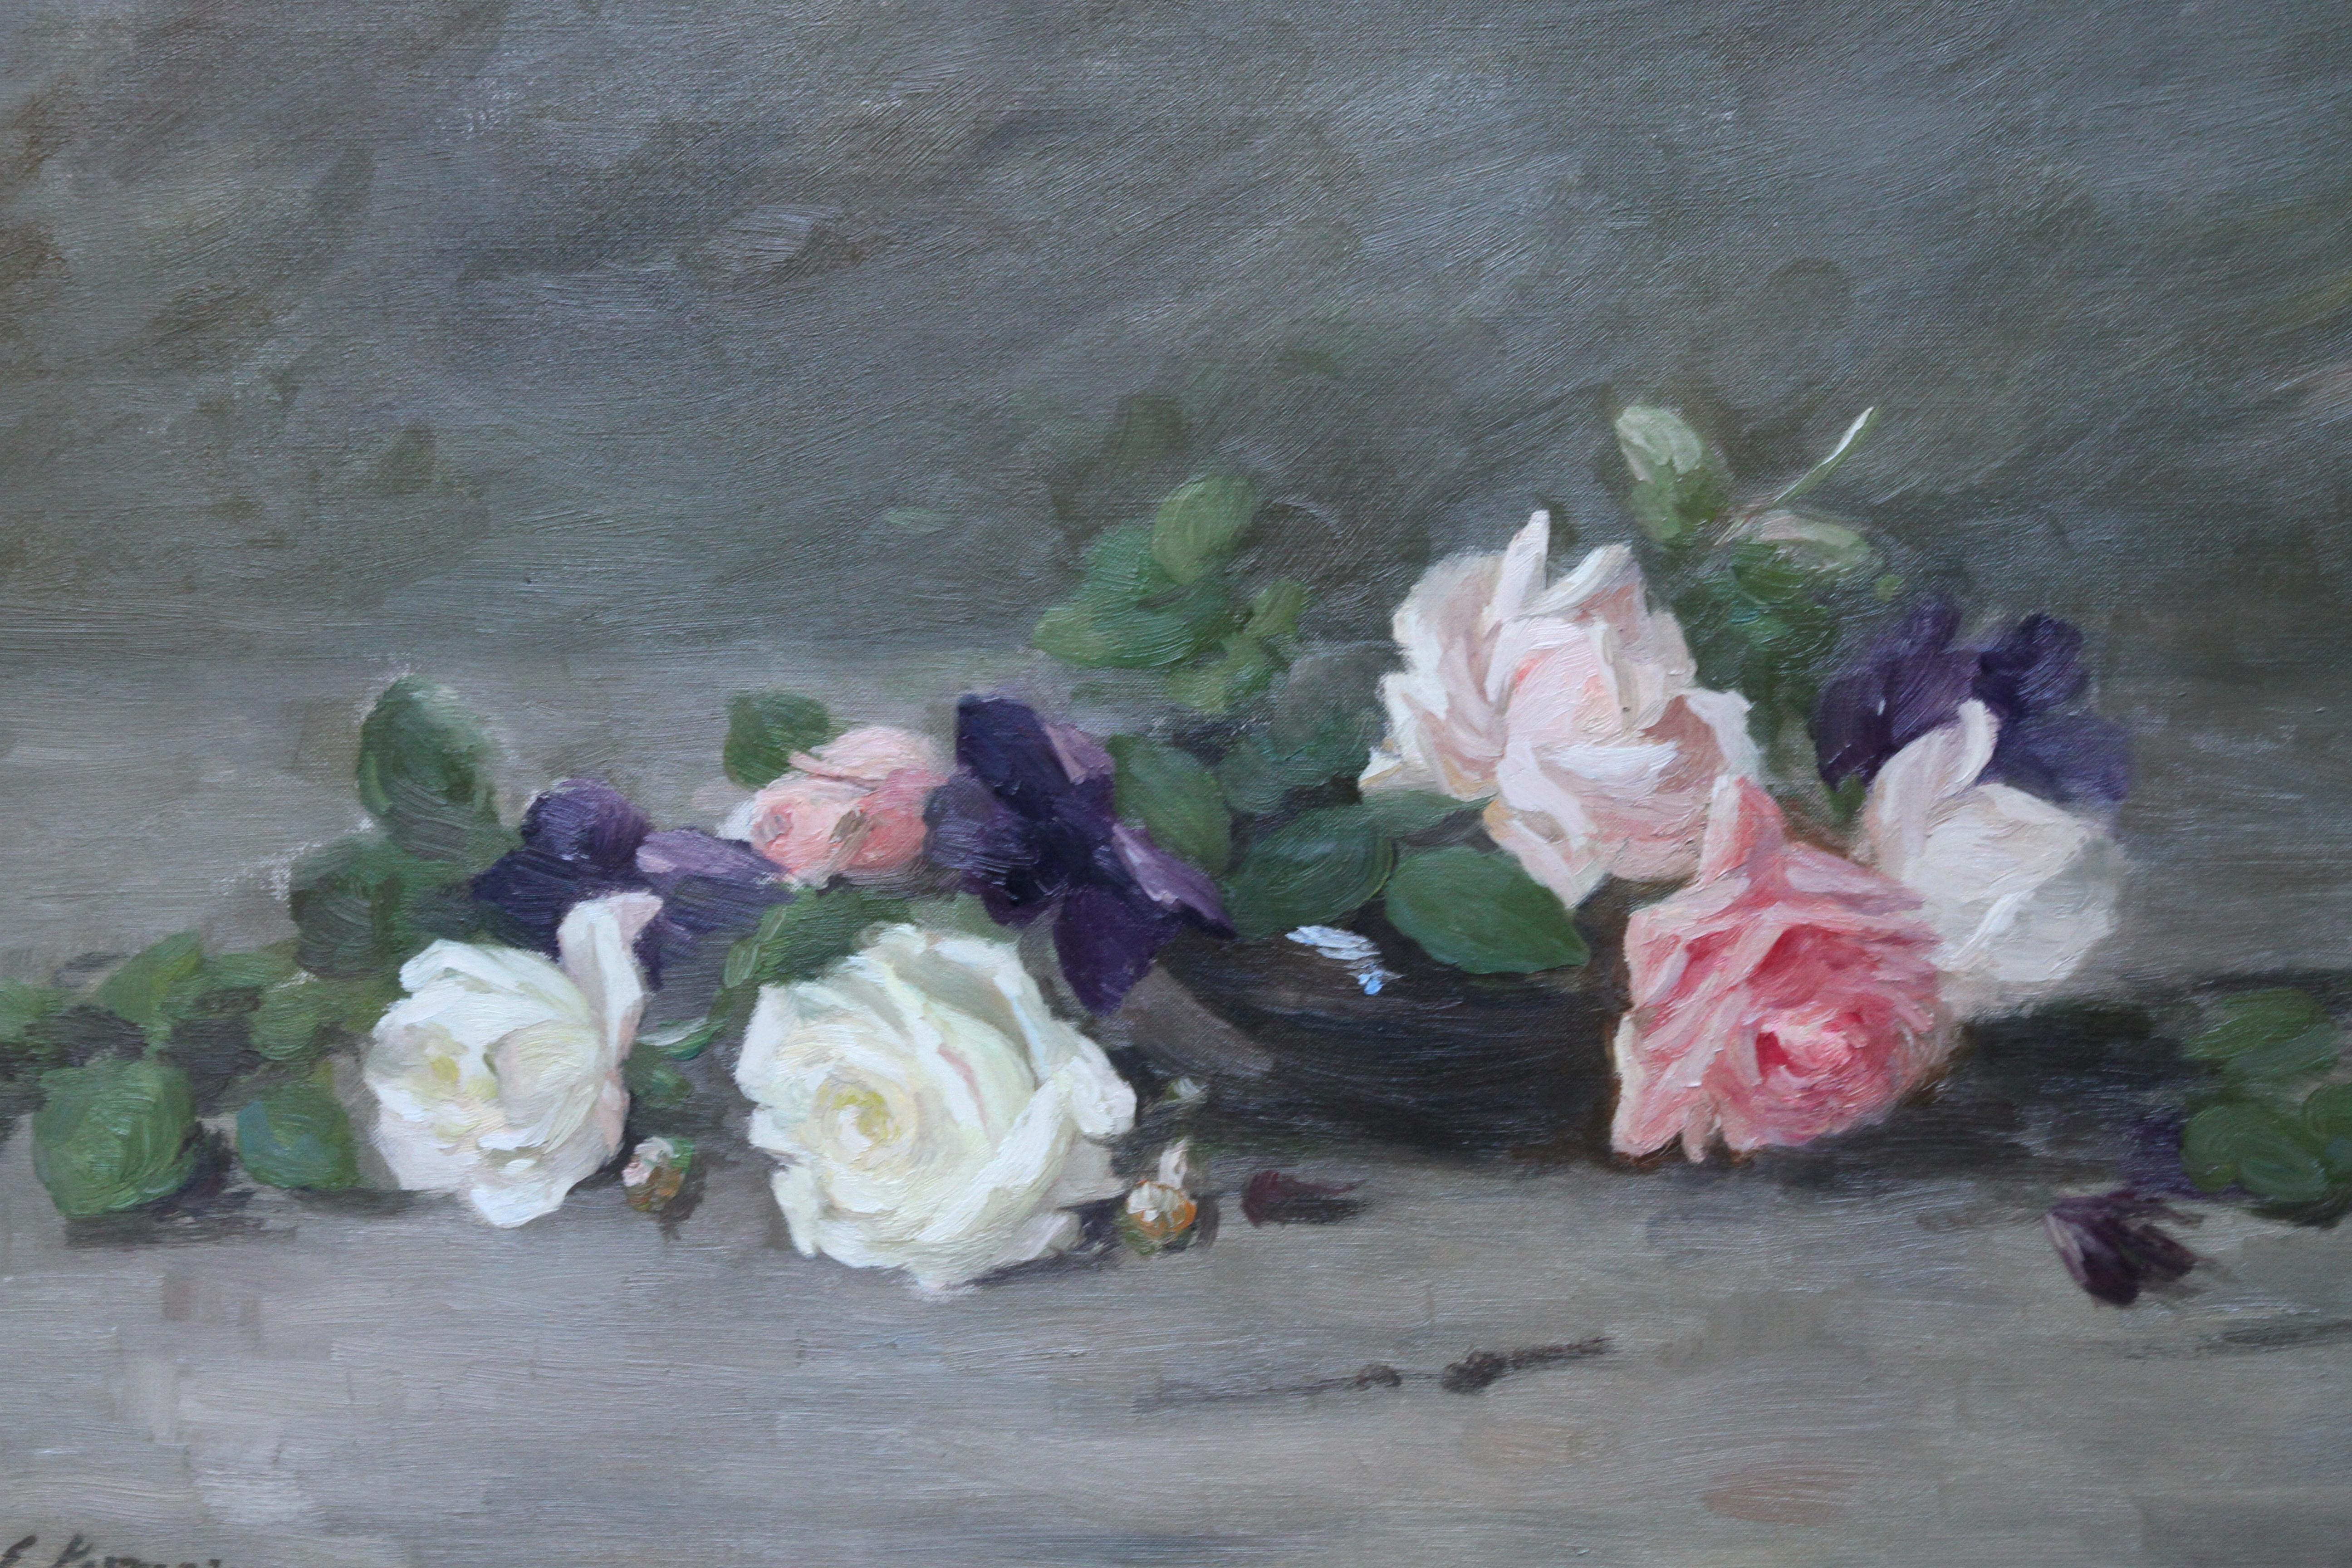 Roses and Violets - Scottish Edwardian art floral oil painting exhib 1908 RSA - Realist Painting by Louise Ellen Perman